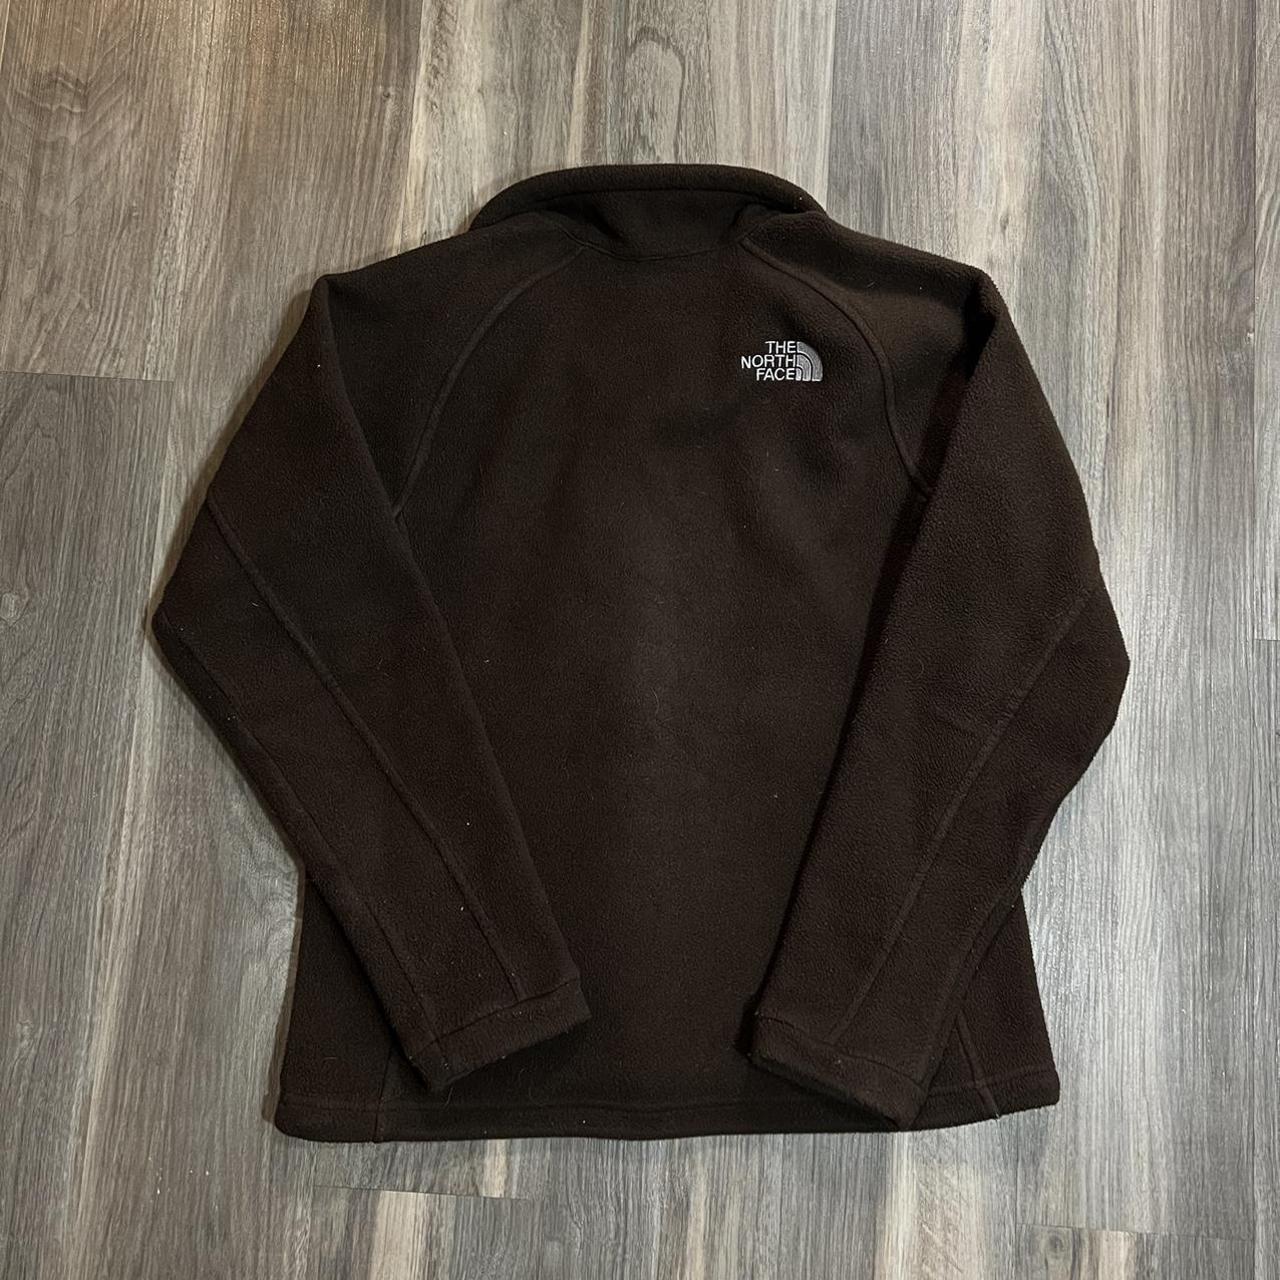 The North Face Women's Brown Jacket | Depop